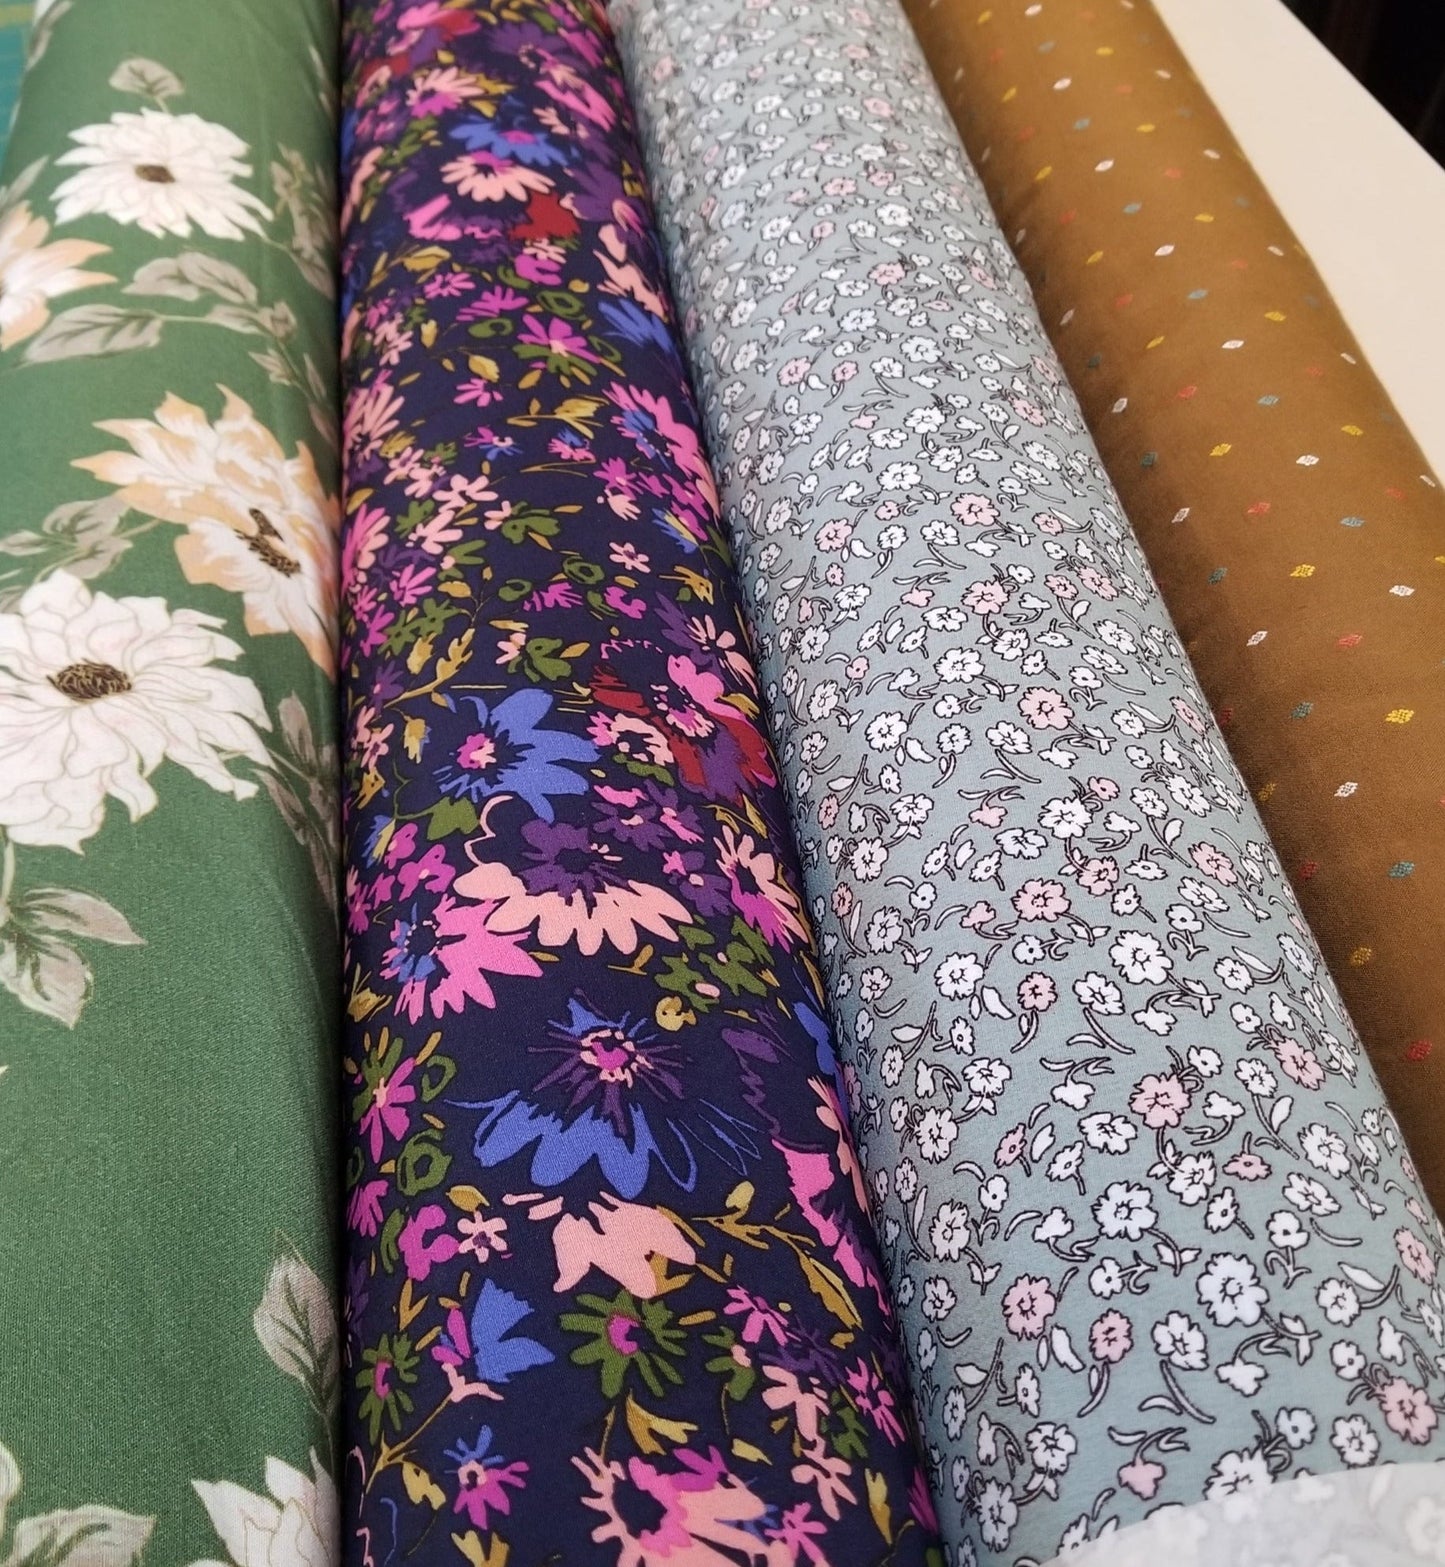 LA Finch 5 yard precut: 5 yards of Designer Deadstock Green and Peach Scattered Florals Rayon Crepe Woven